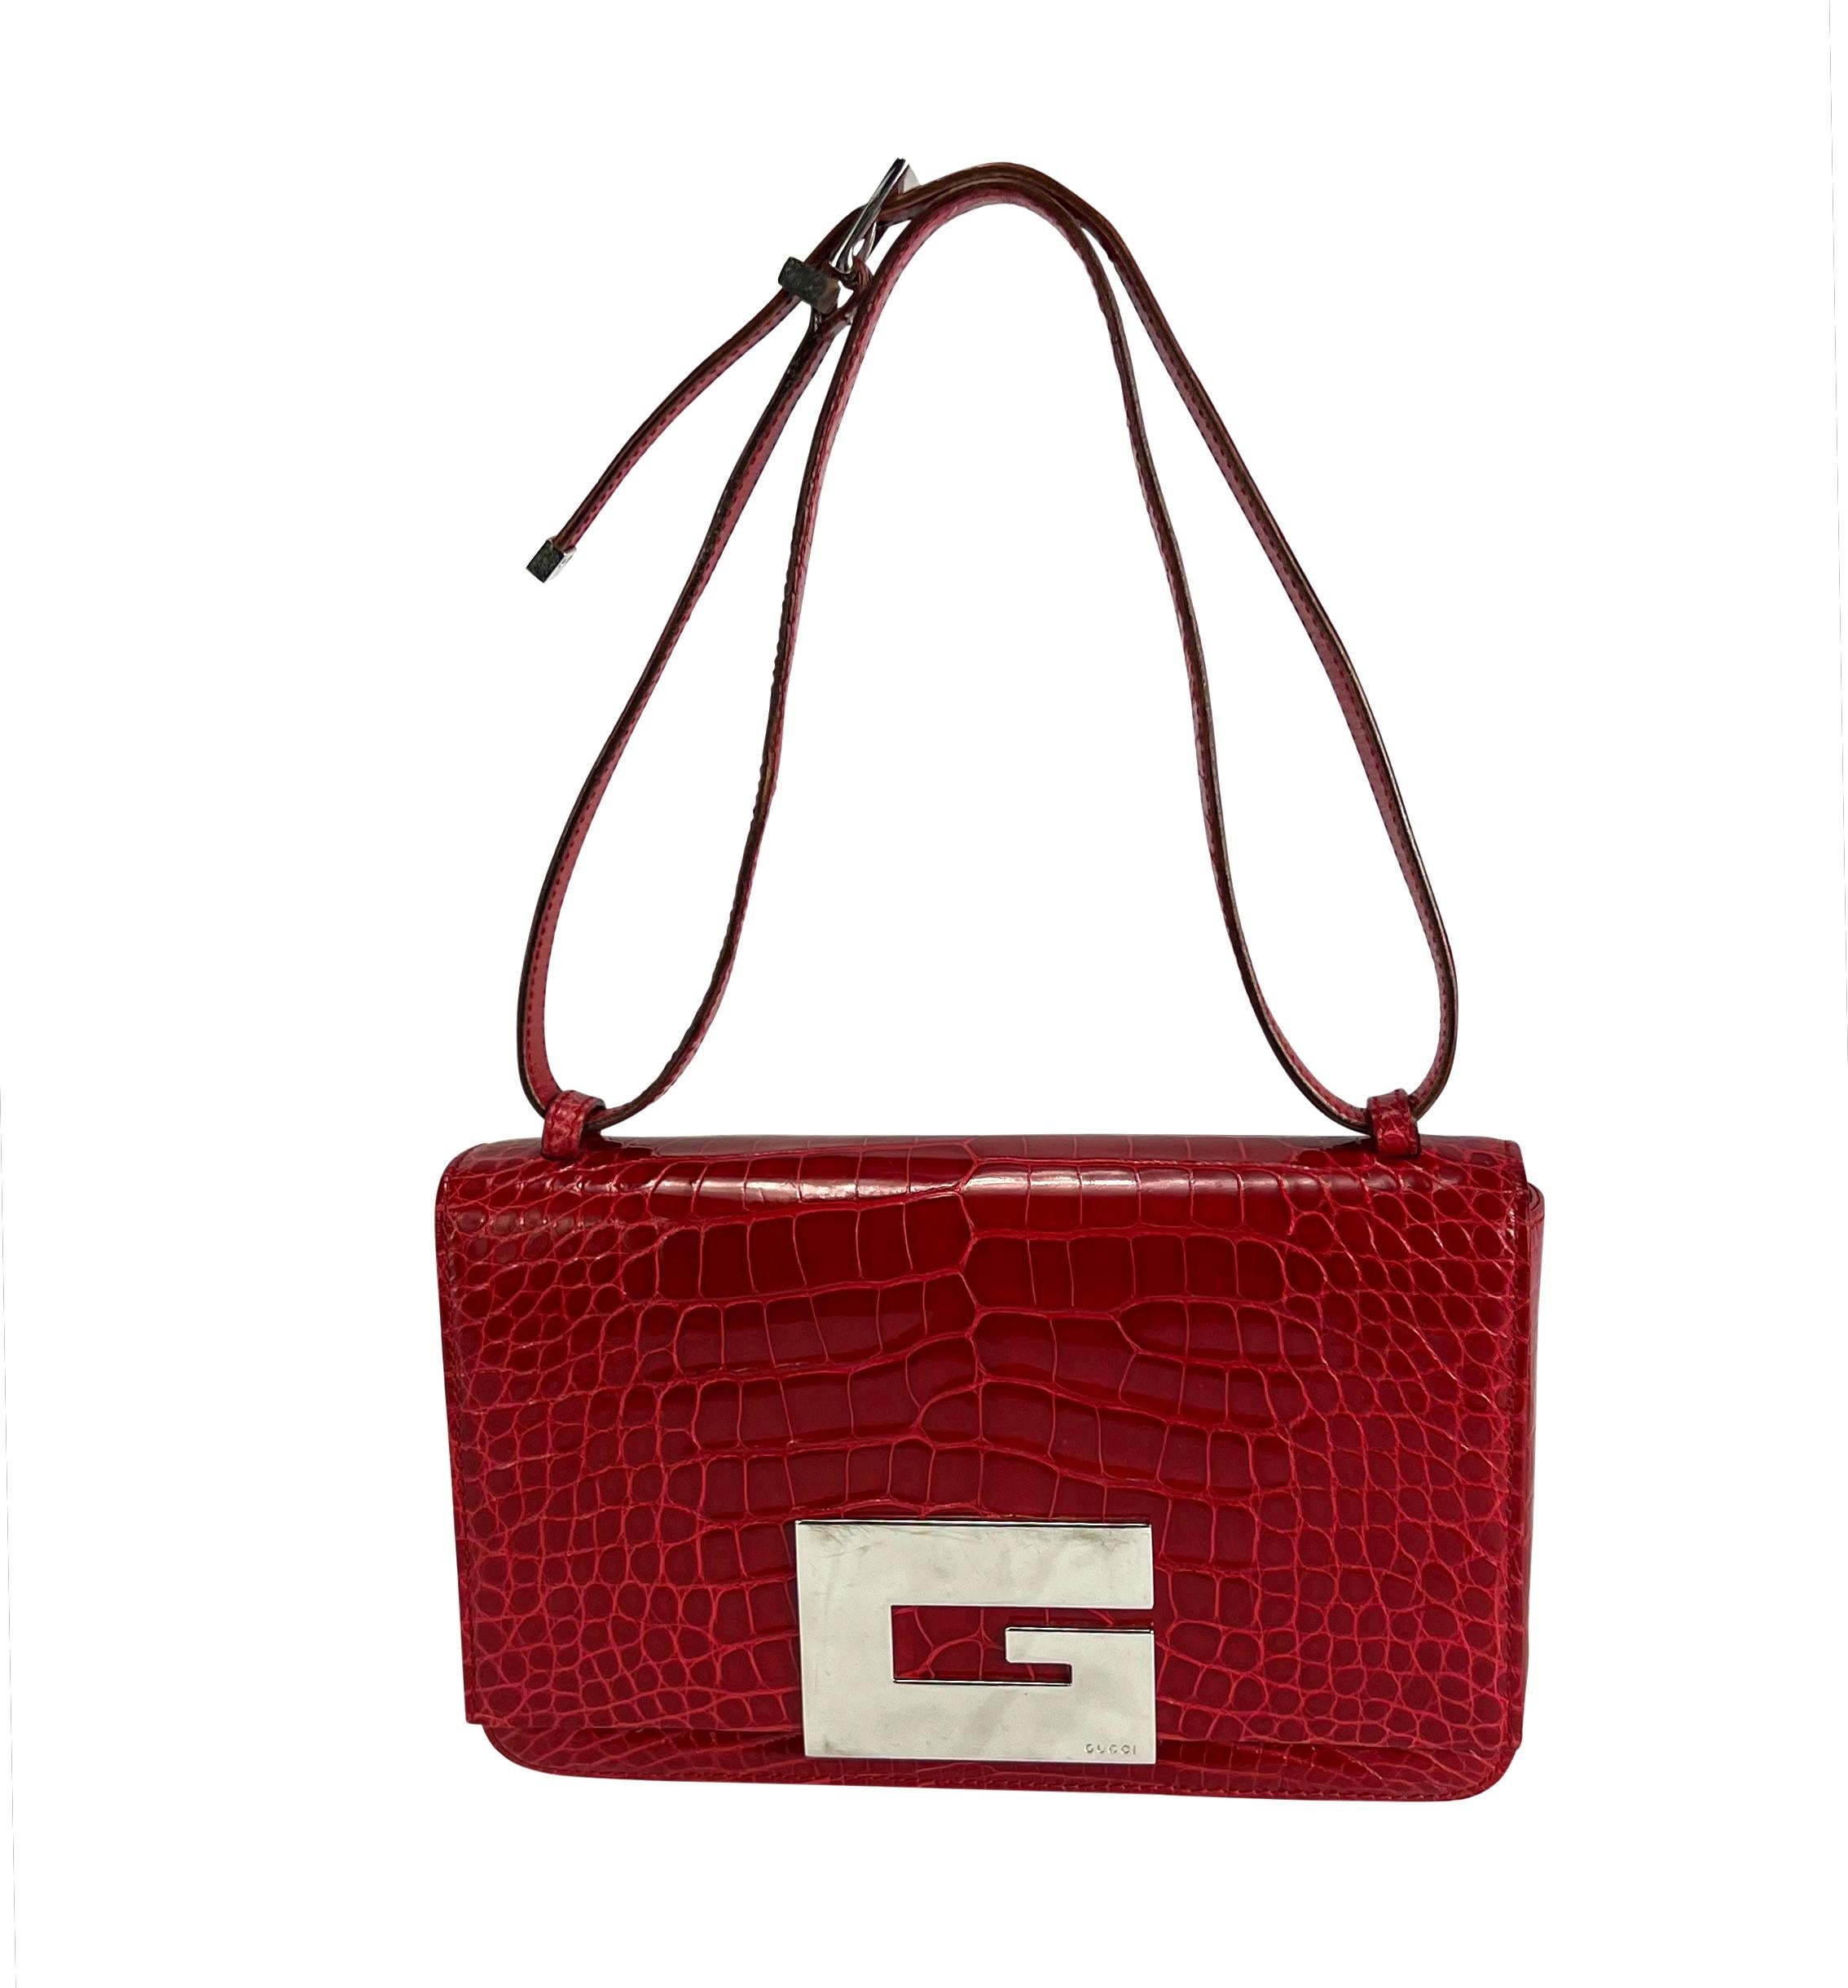 S/S 1998 Gucci by Tom Ford Runway Red Alligator Adjustable Crossbody G Logo Bag For Sale 1